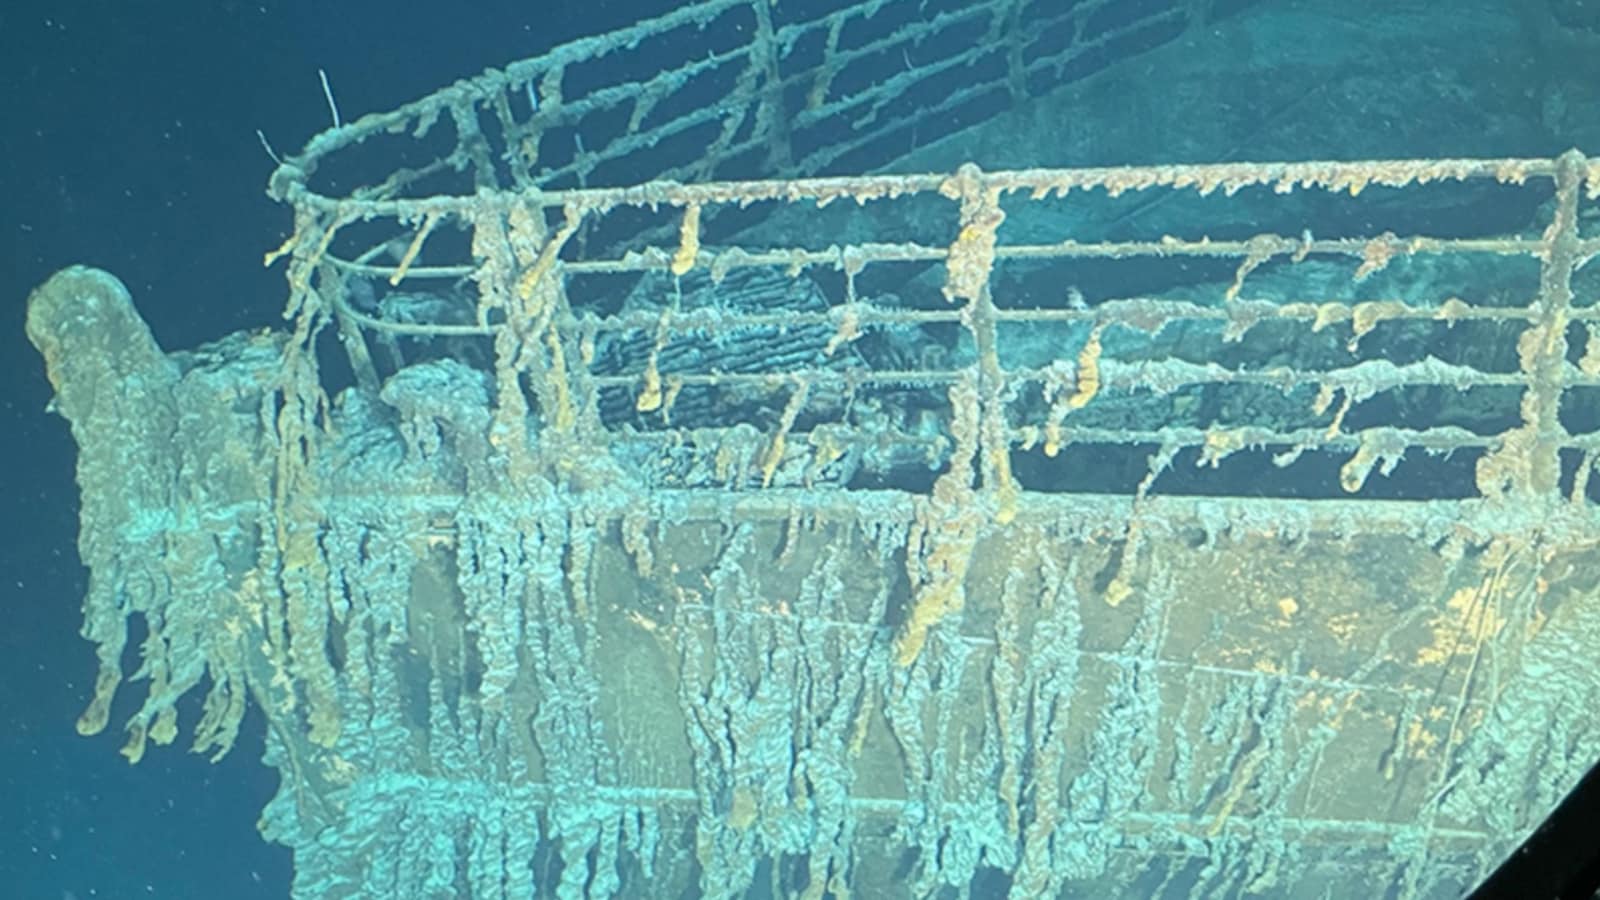 inside the real titanic wreck